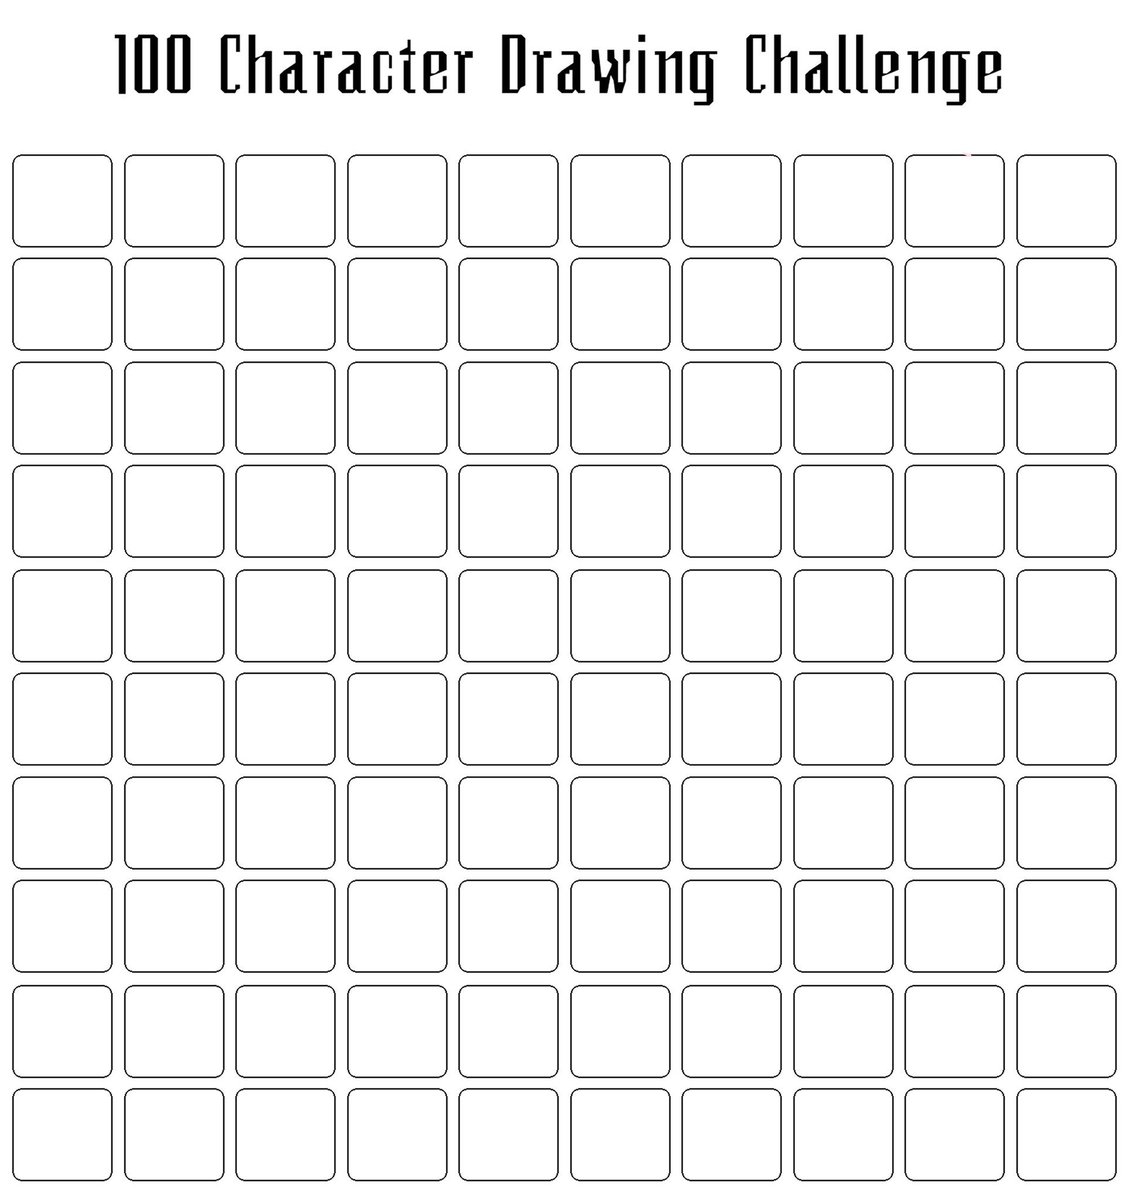 i feel motivated fr

im gonna do this. reply if you want it (no need to follow, just give me a ref)

#art #drawing #artchallenge #freeart